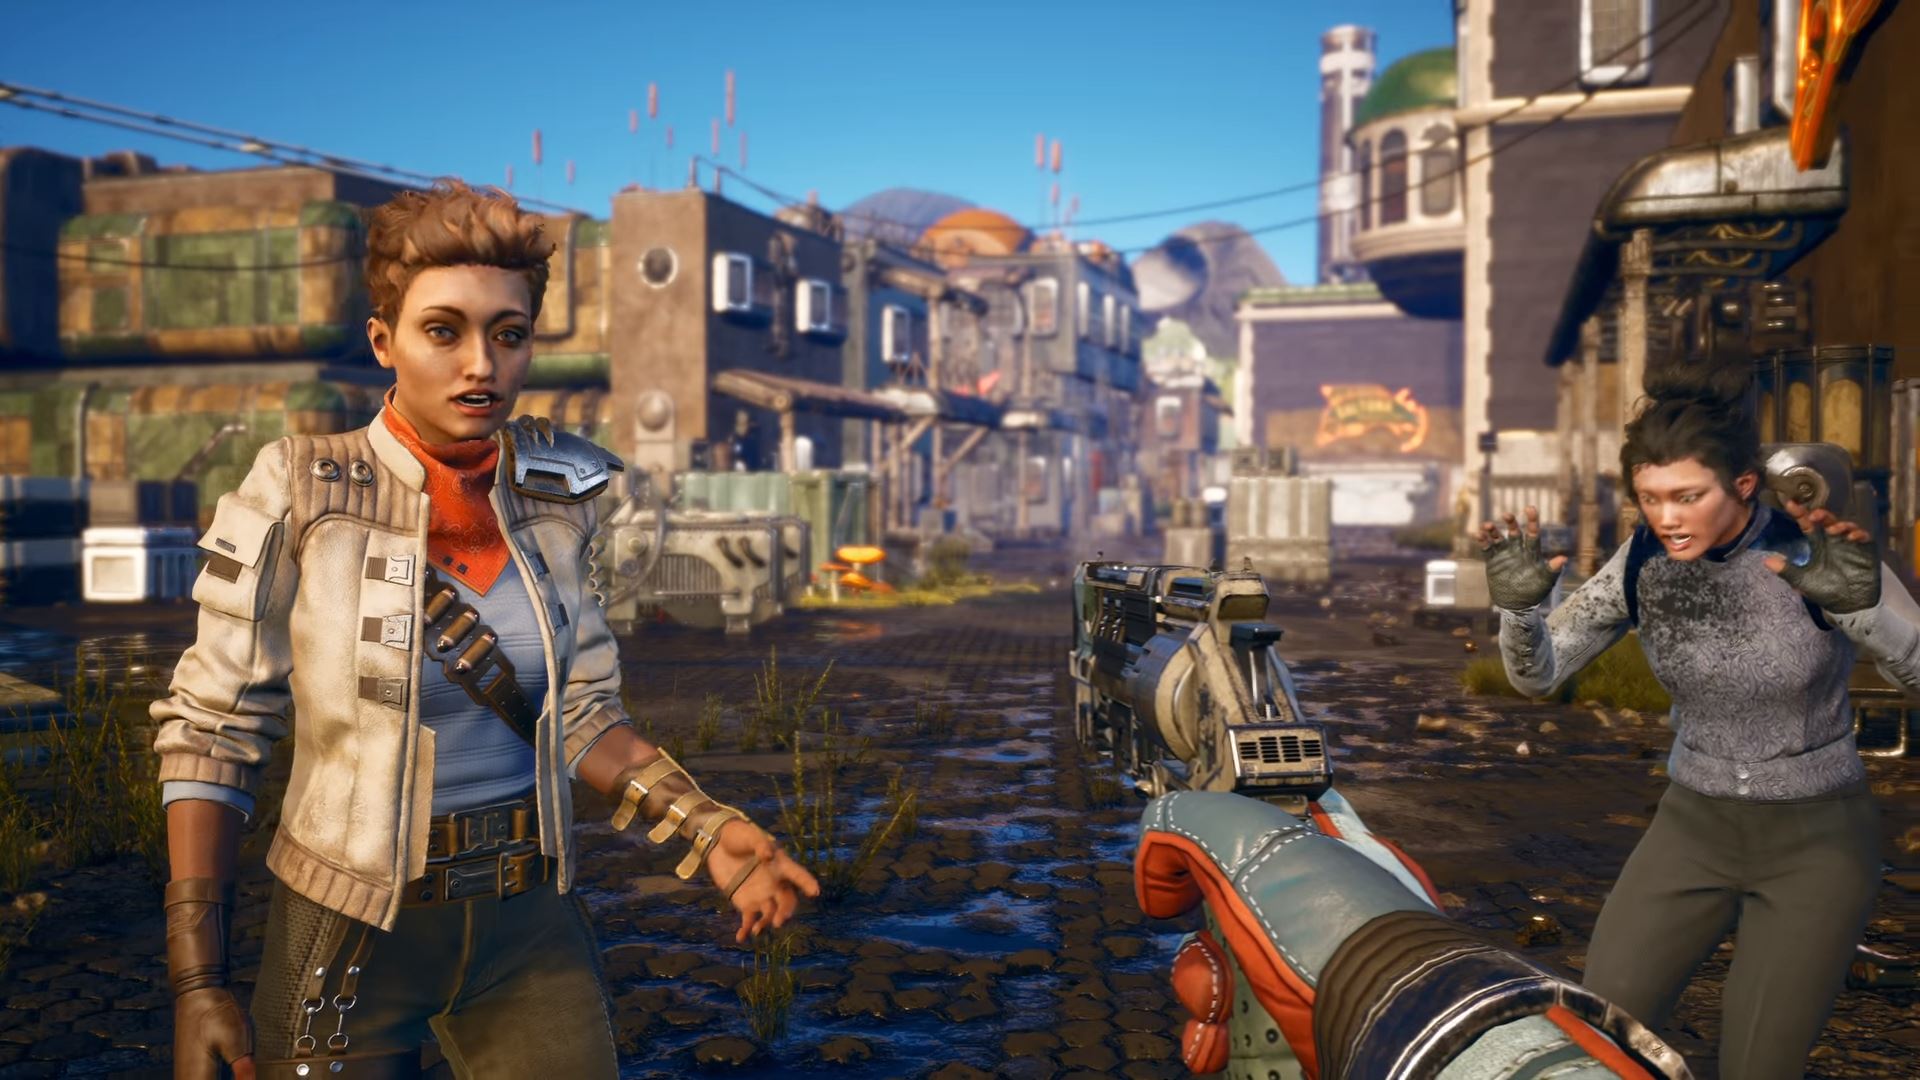 Mispend jernbane Godkendelse The Outer Worlds Supports Xbox One X Enhancements But Not PS4 Pro